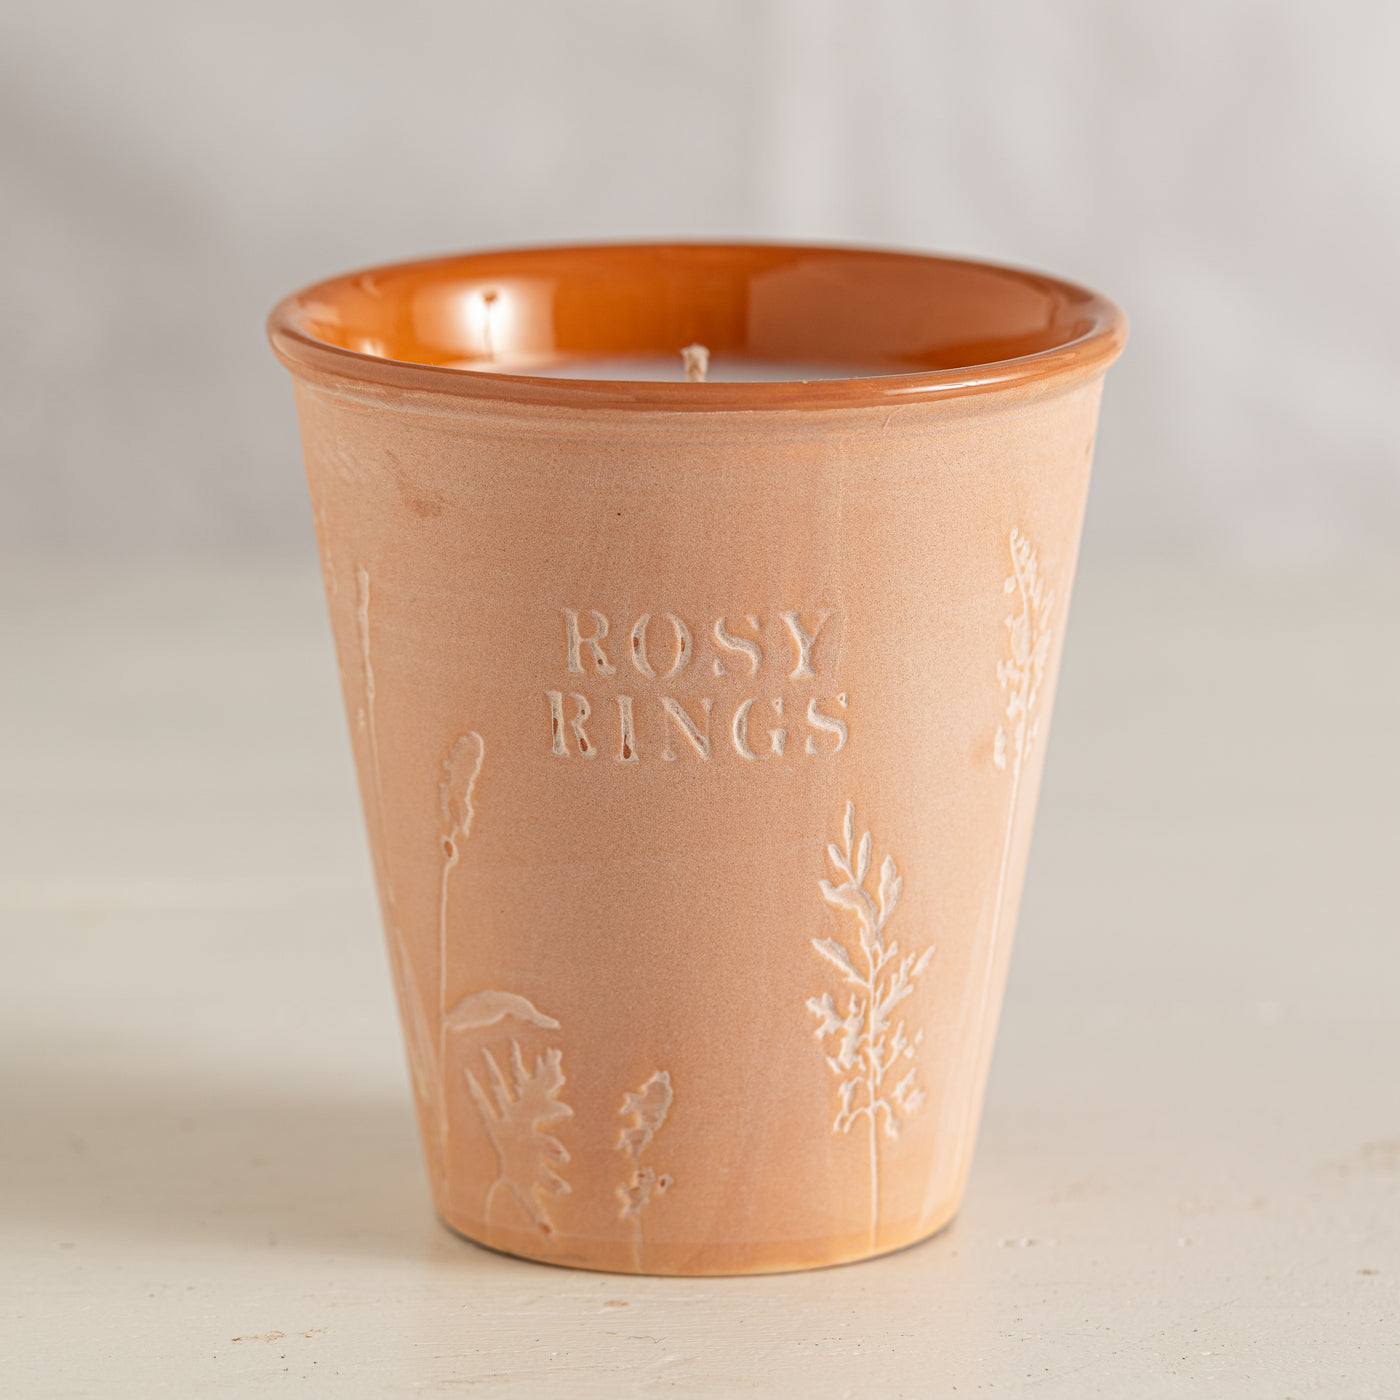 Dirt Garden Pot Candle + Plantable Seed Paper Dust Covers